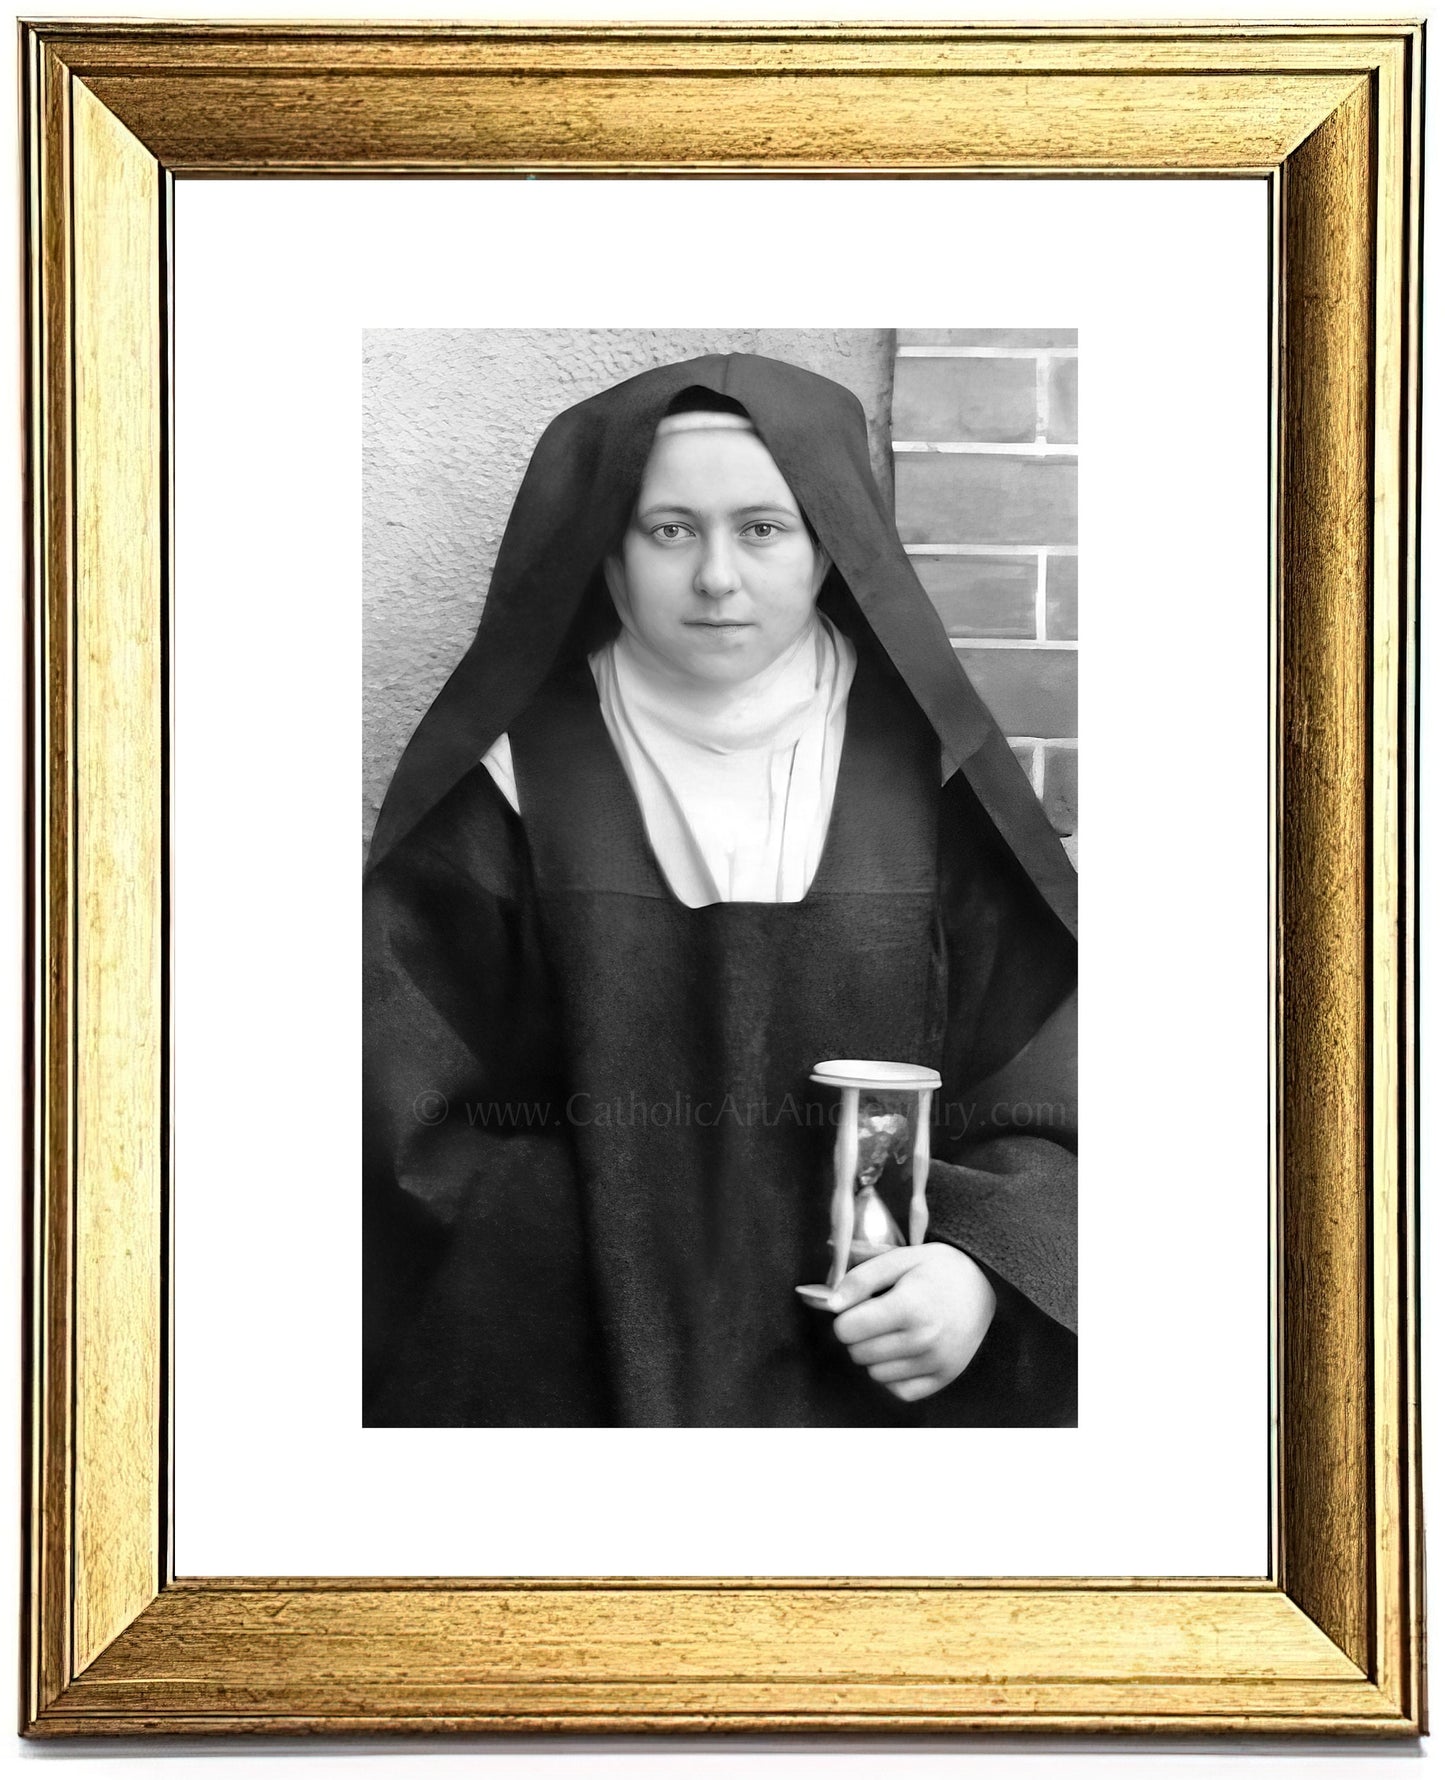 Saint Therese with Hour Glass – Restored! – 3 sizes – Catholic Art Print